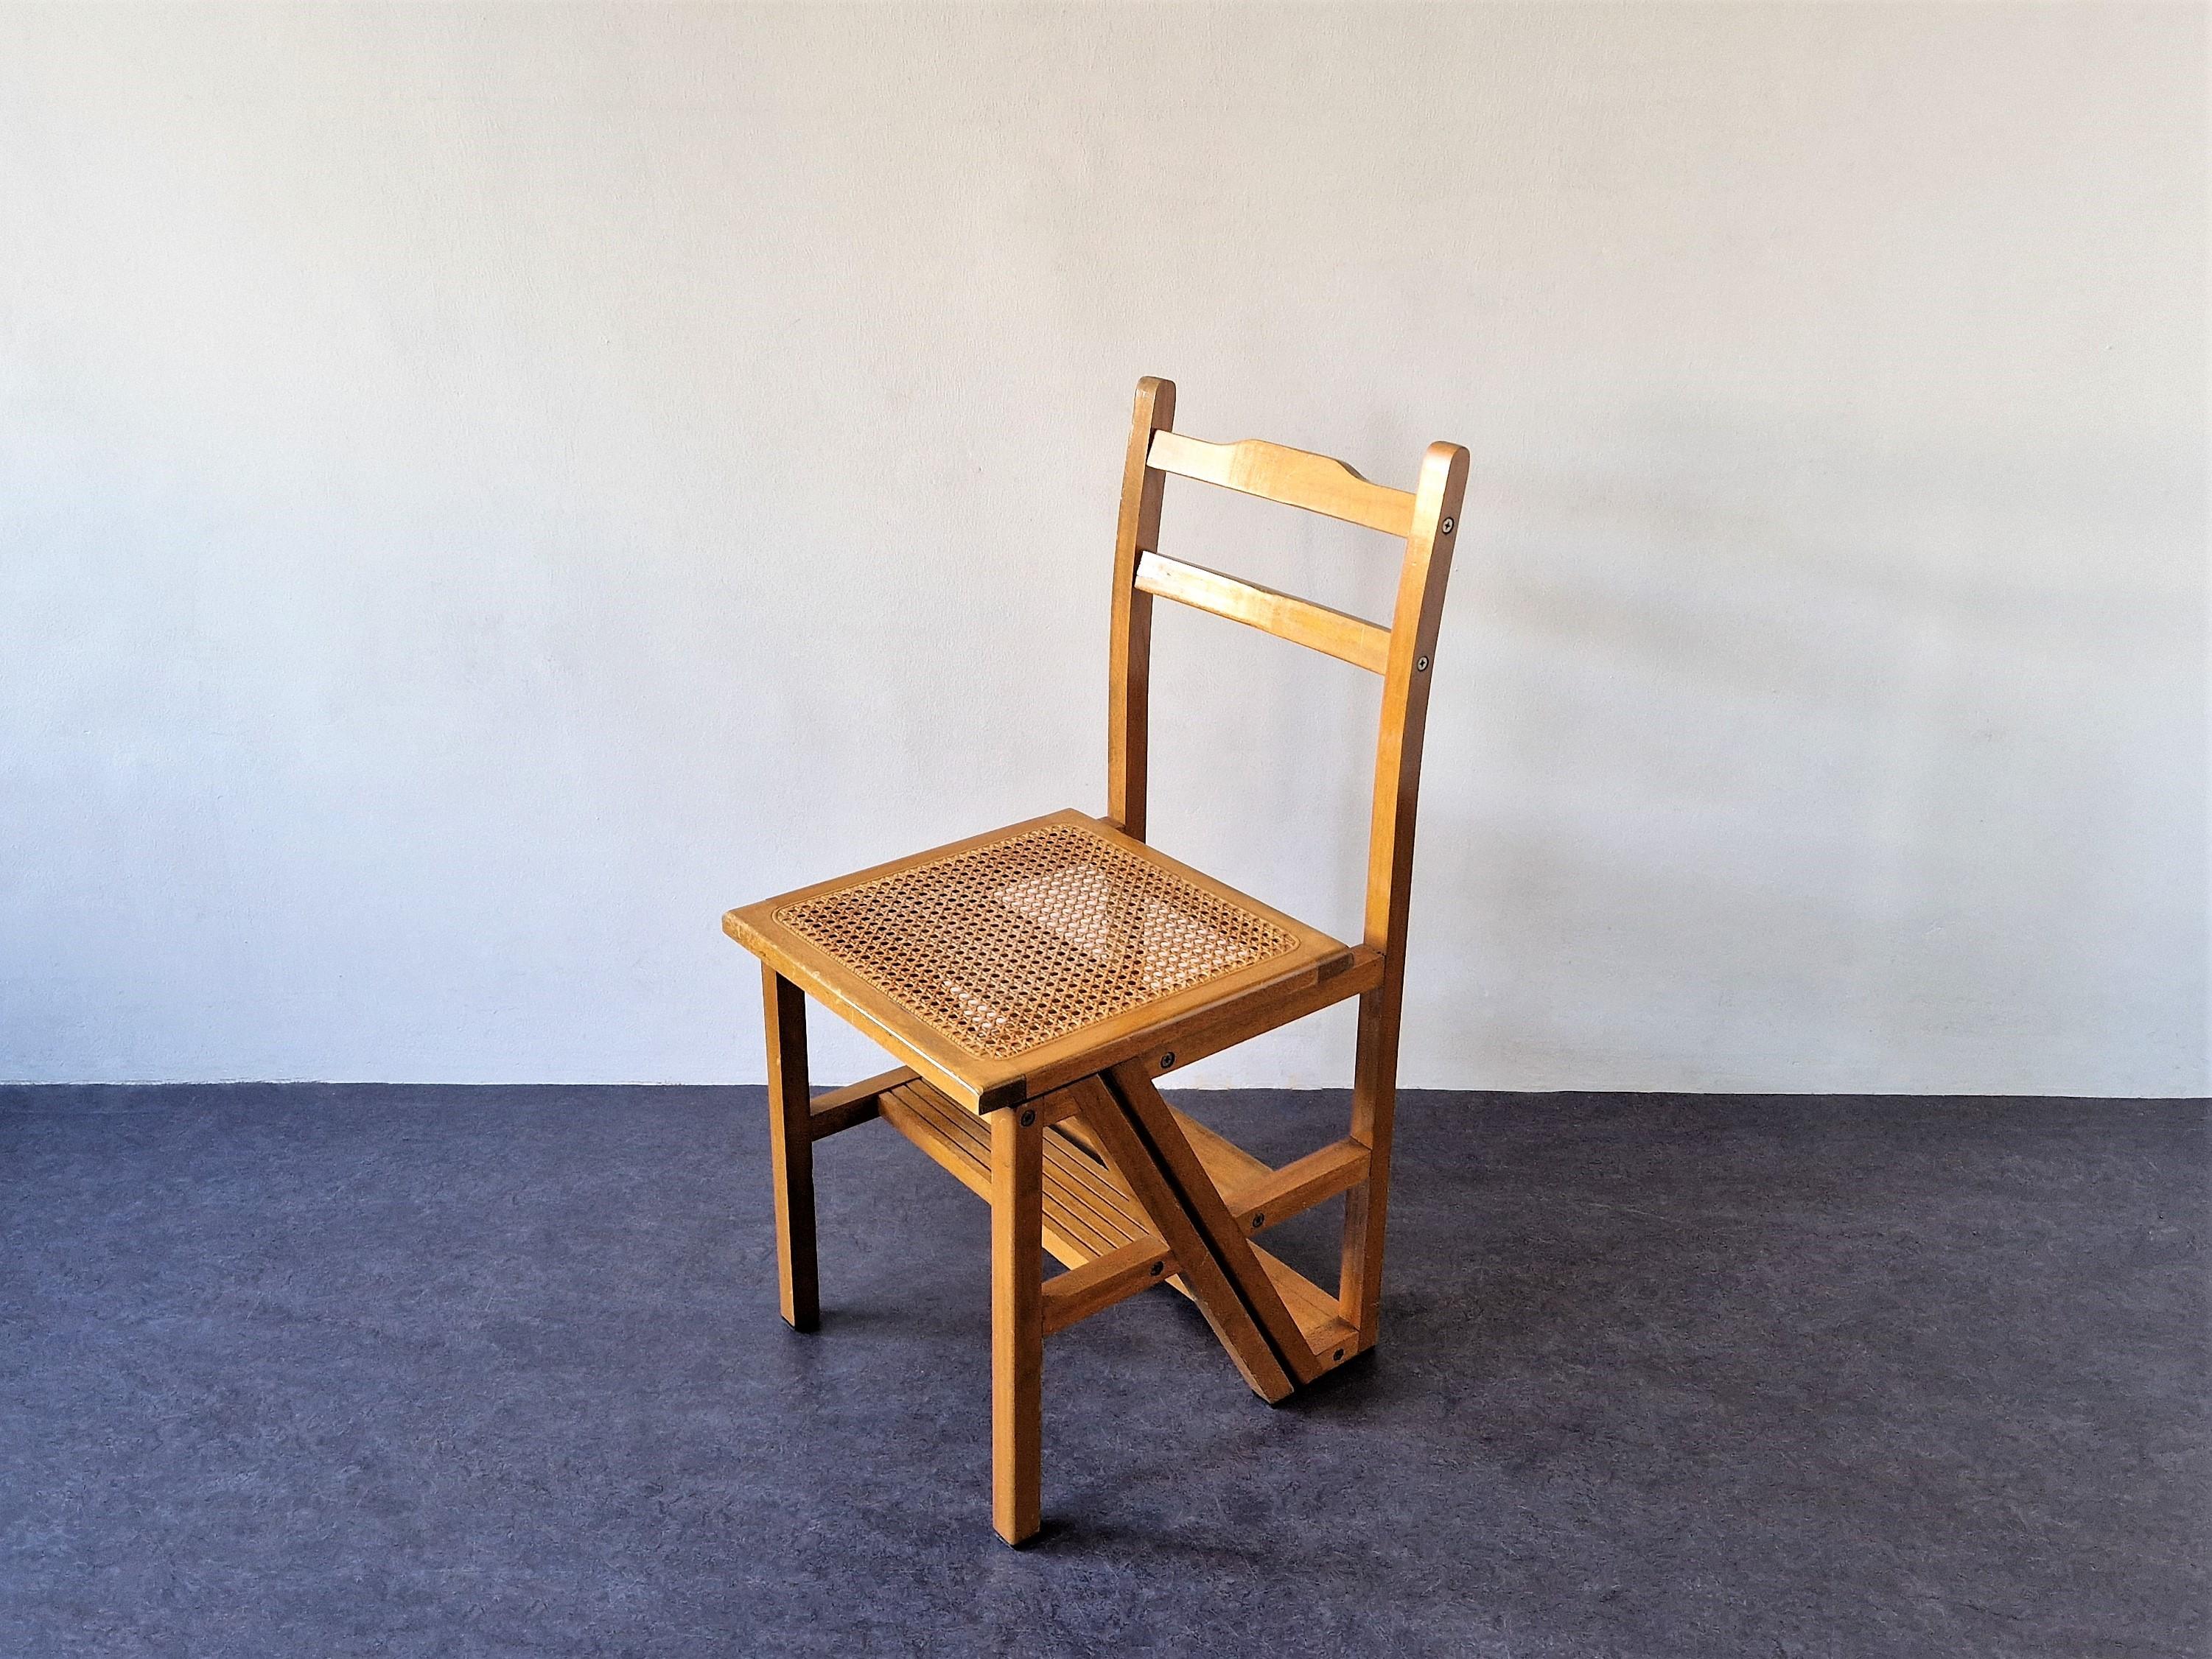 This transforming wooden step chair is great for small spaces where you need to reach objects in high places, such as a book case or kitchen cabinet and also when you occasionally need an extra chair. The chair can be easily transformed into a small